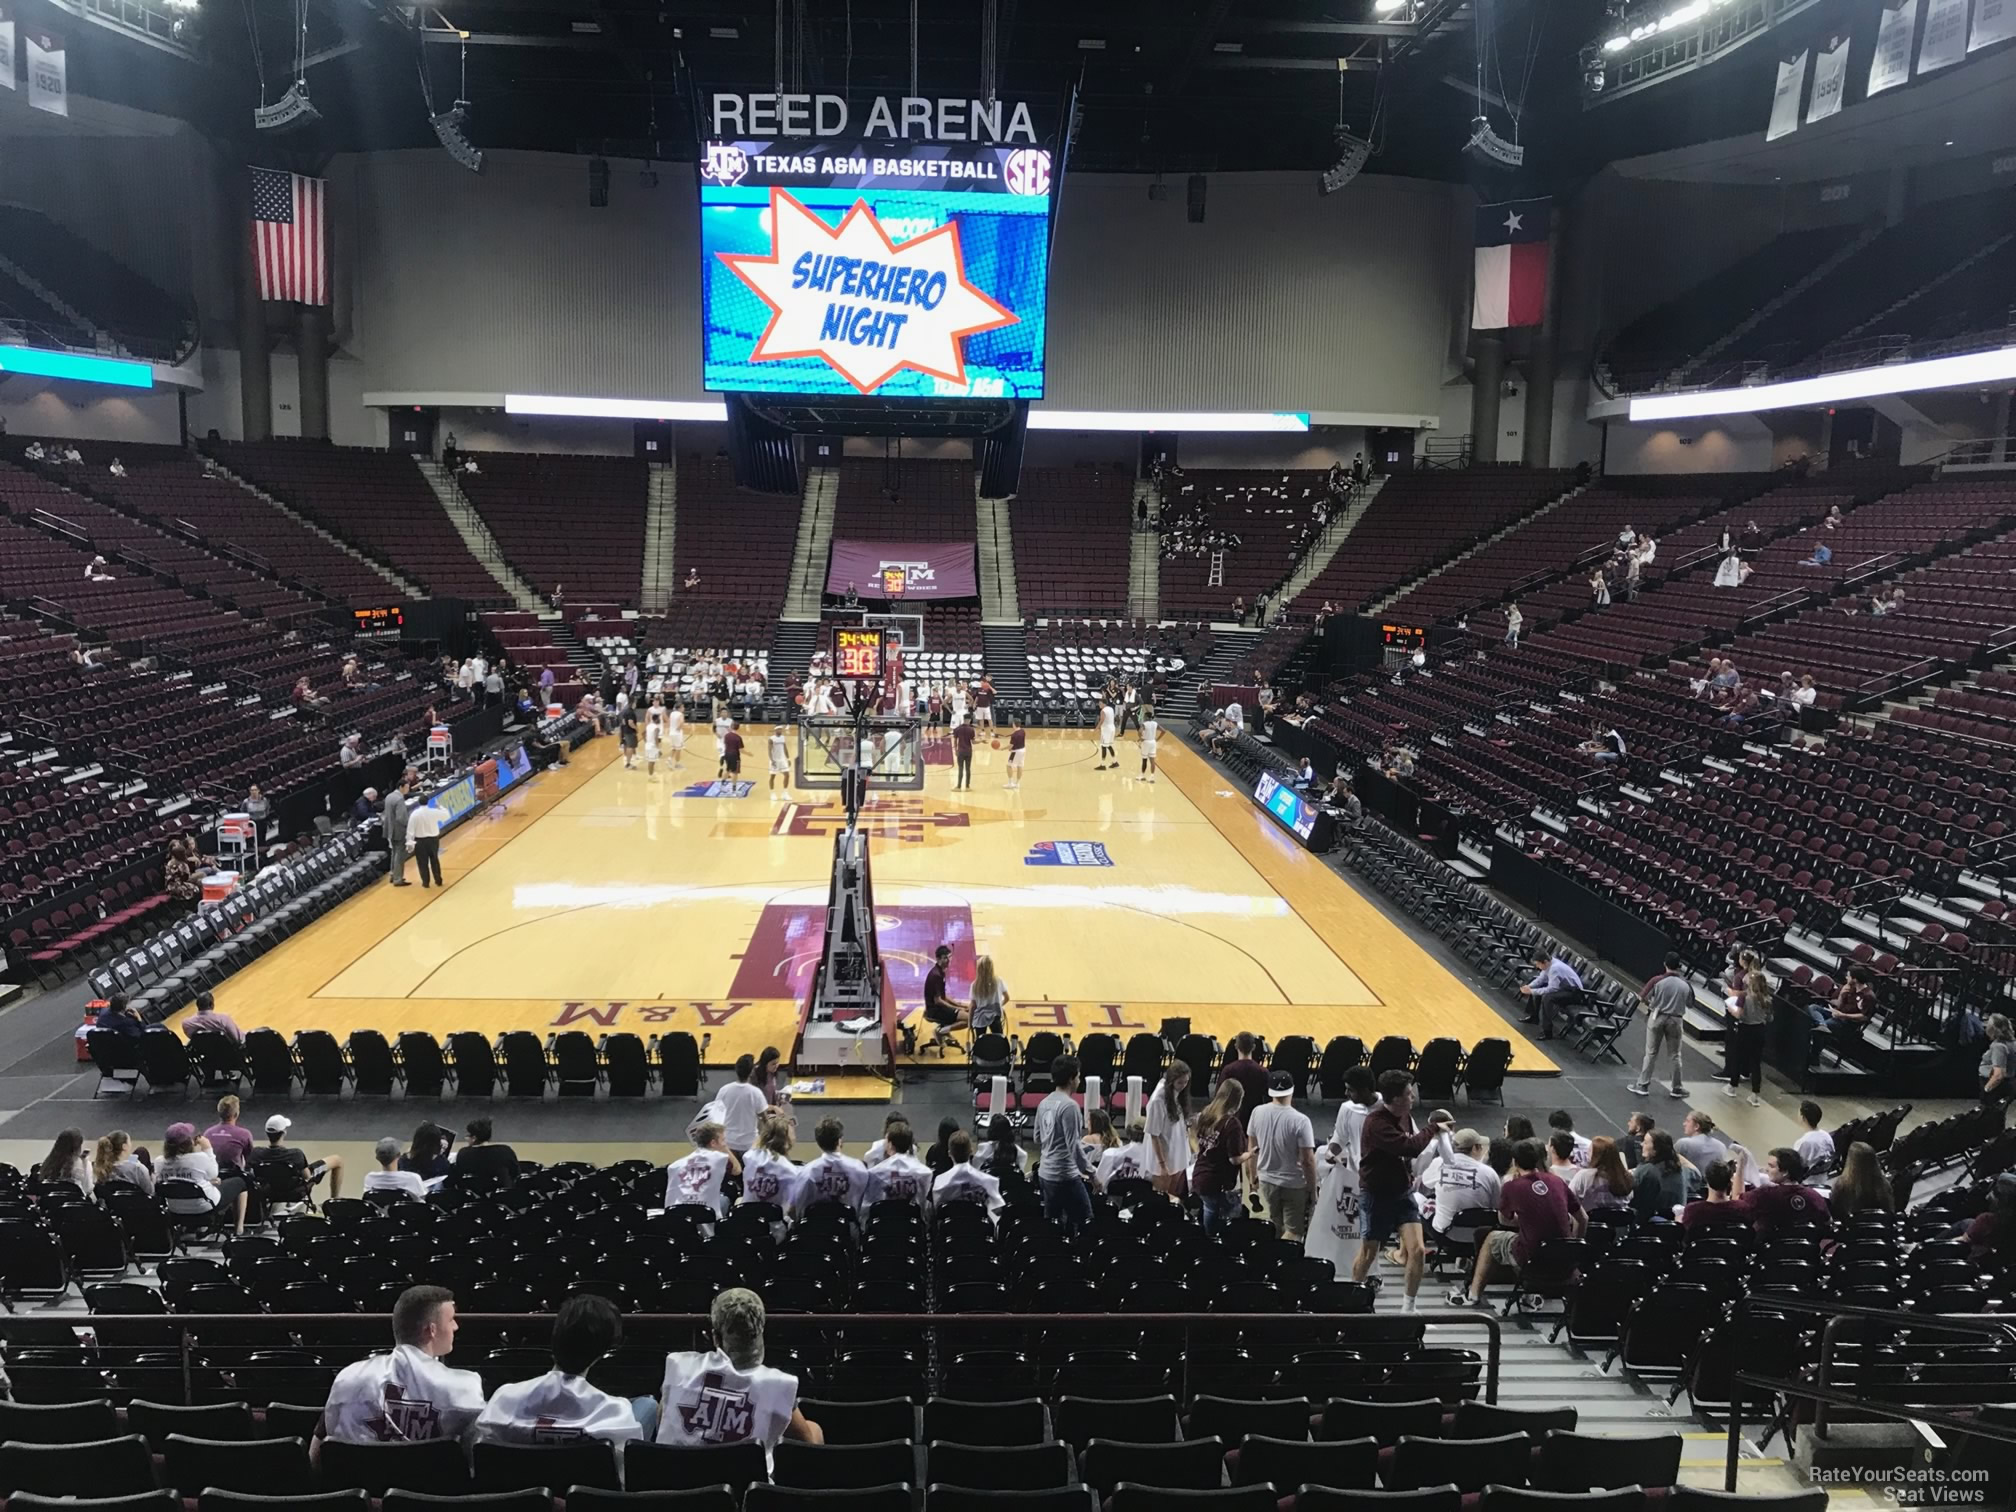 section 113, row j seat view  - reed arena